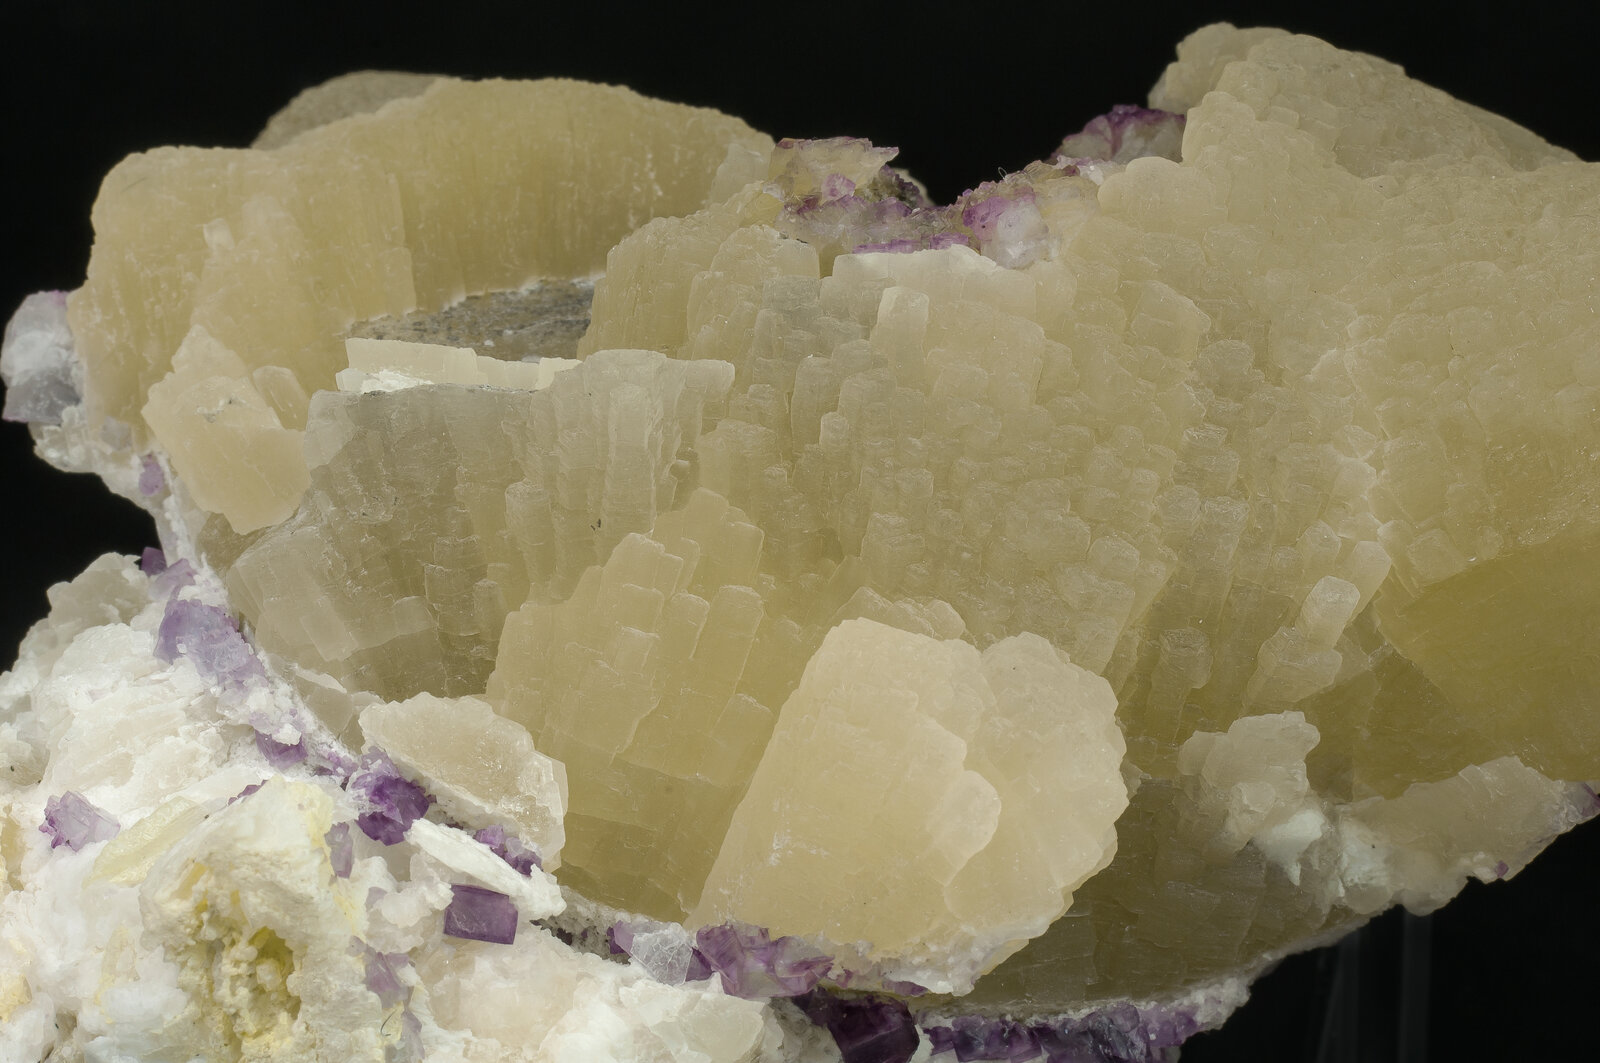 specimens/s_imagesAO5/Witherite-TLP97AO5d.jpg